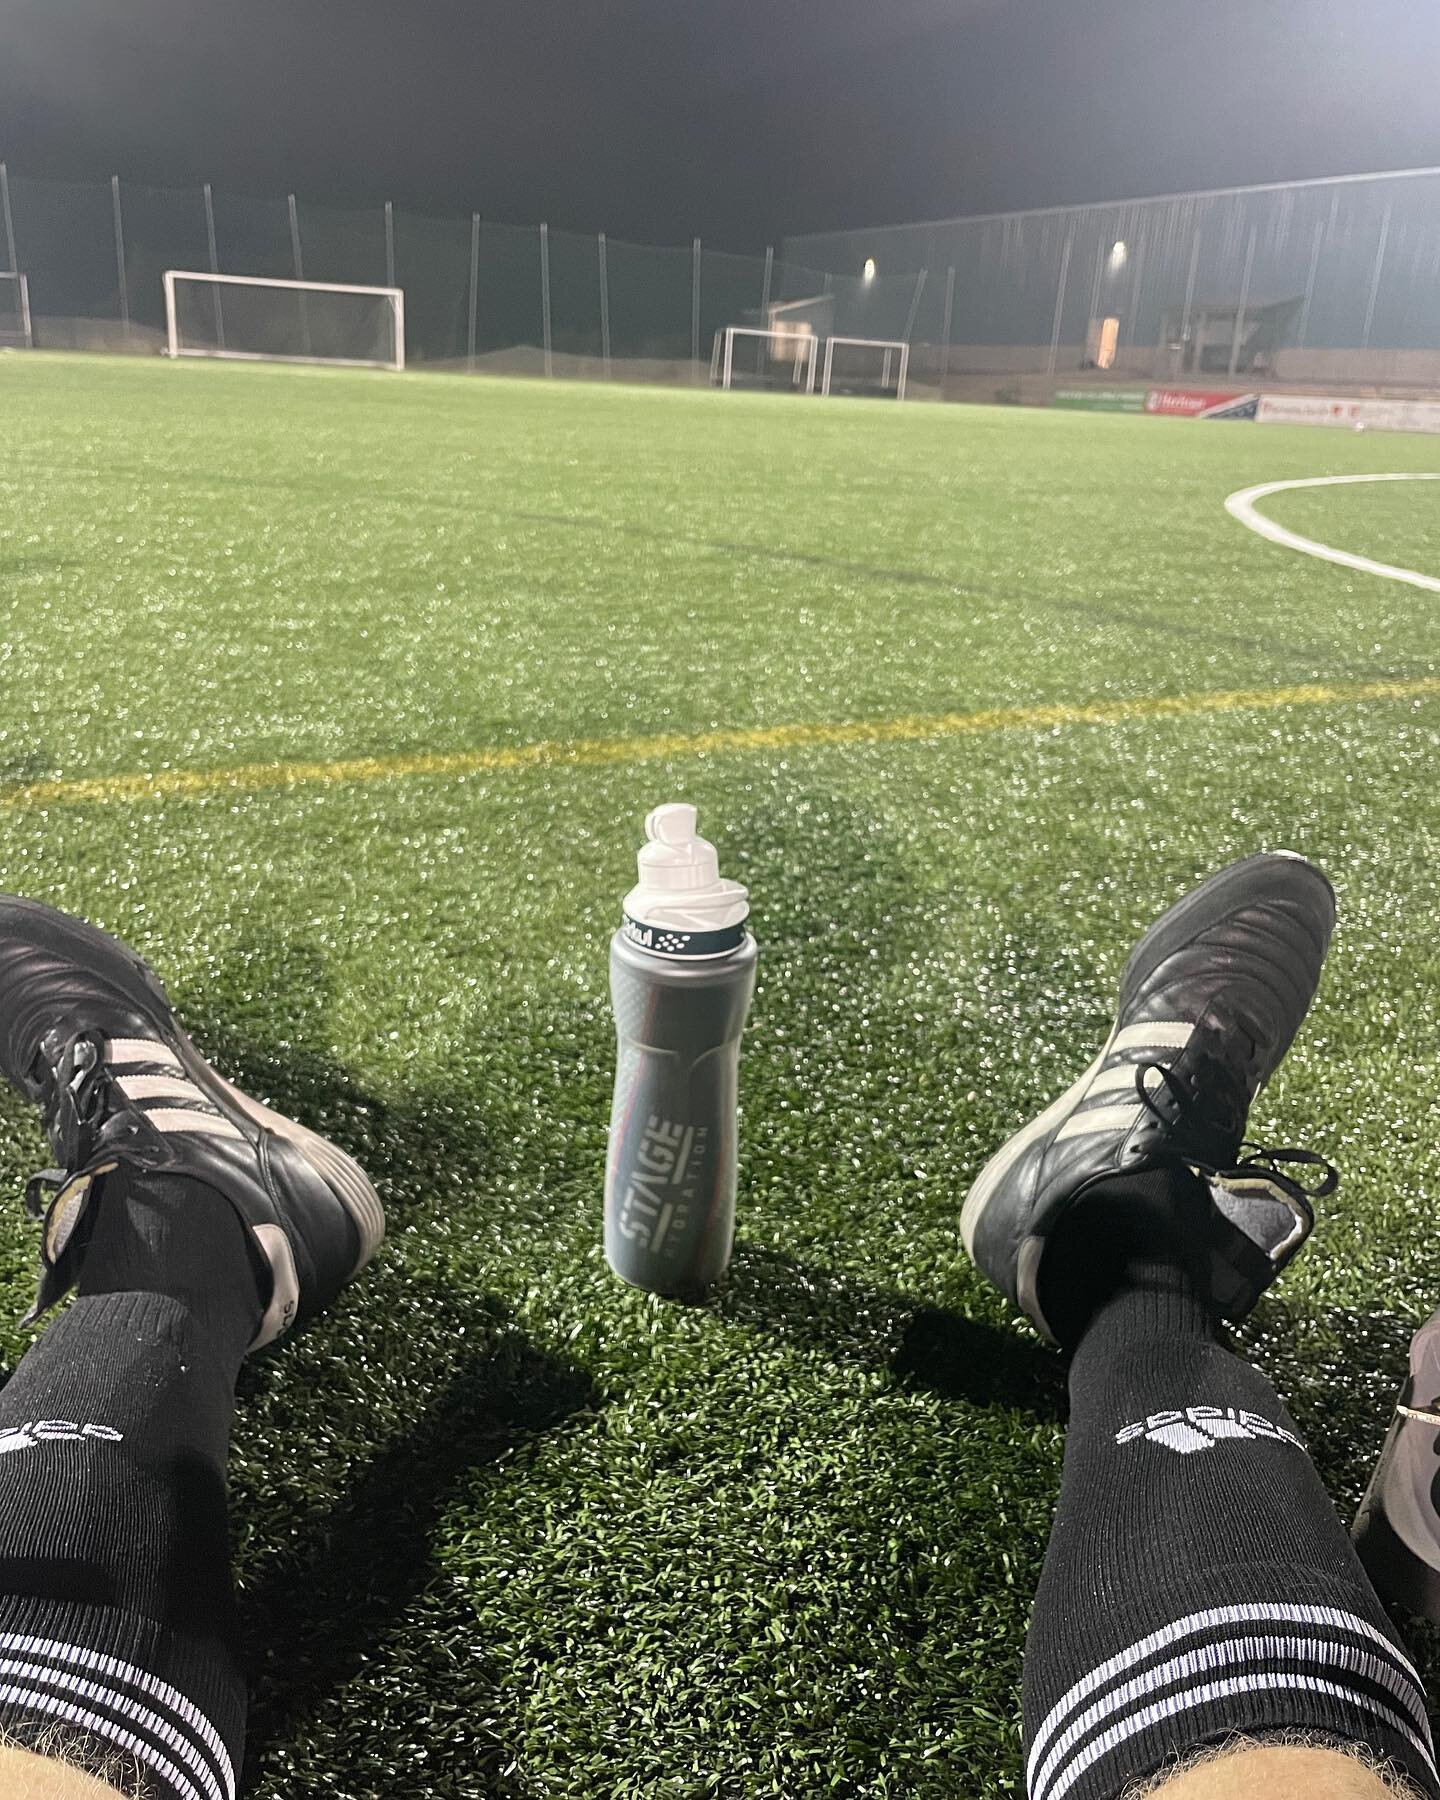 Evening Mens league soccer game. Now that the weather is nice, and the nights aren&rsquo;t as cold, it&rsquo;s so great to be playing outside again. Plus it&rsquo;s a great change to the endurance events, by going for some sprints all over the field 